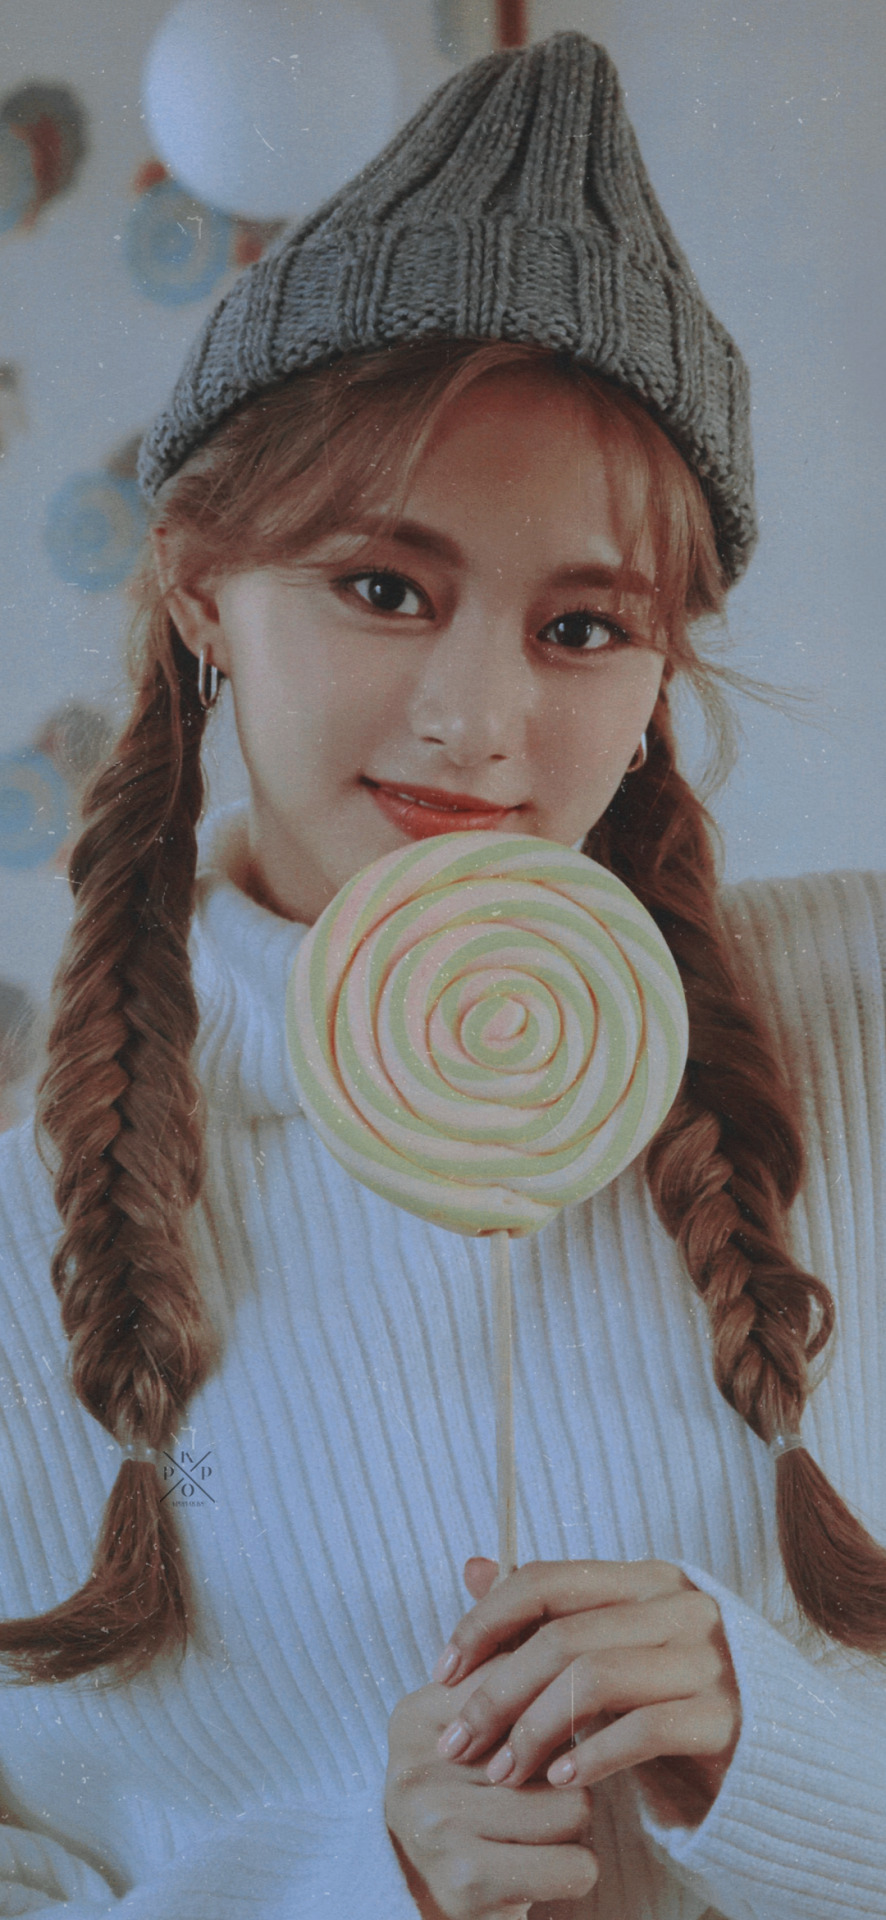 ꒰ ˀˀ ↷ yes, i am tzuyu ”♡ᵎ ꒱part.²like/reblog | @spearbinsungdon’t repost our work or claim it as yours #maju#tzuyu#tzuyu lockscreen#tzuyu lockscreens#tzuyu edit#tzuyu edits#tzuyu wallpaper#tzuyu wallpapers#chou tzuyu#tzuyu twice#twice tzuyu#twice#twice lockscreen#twice lockscreens#twice edit#twice edits#twice wallpaper#twice wallpapers